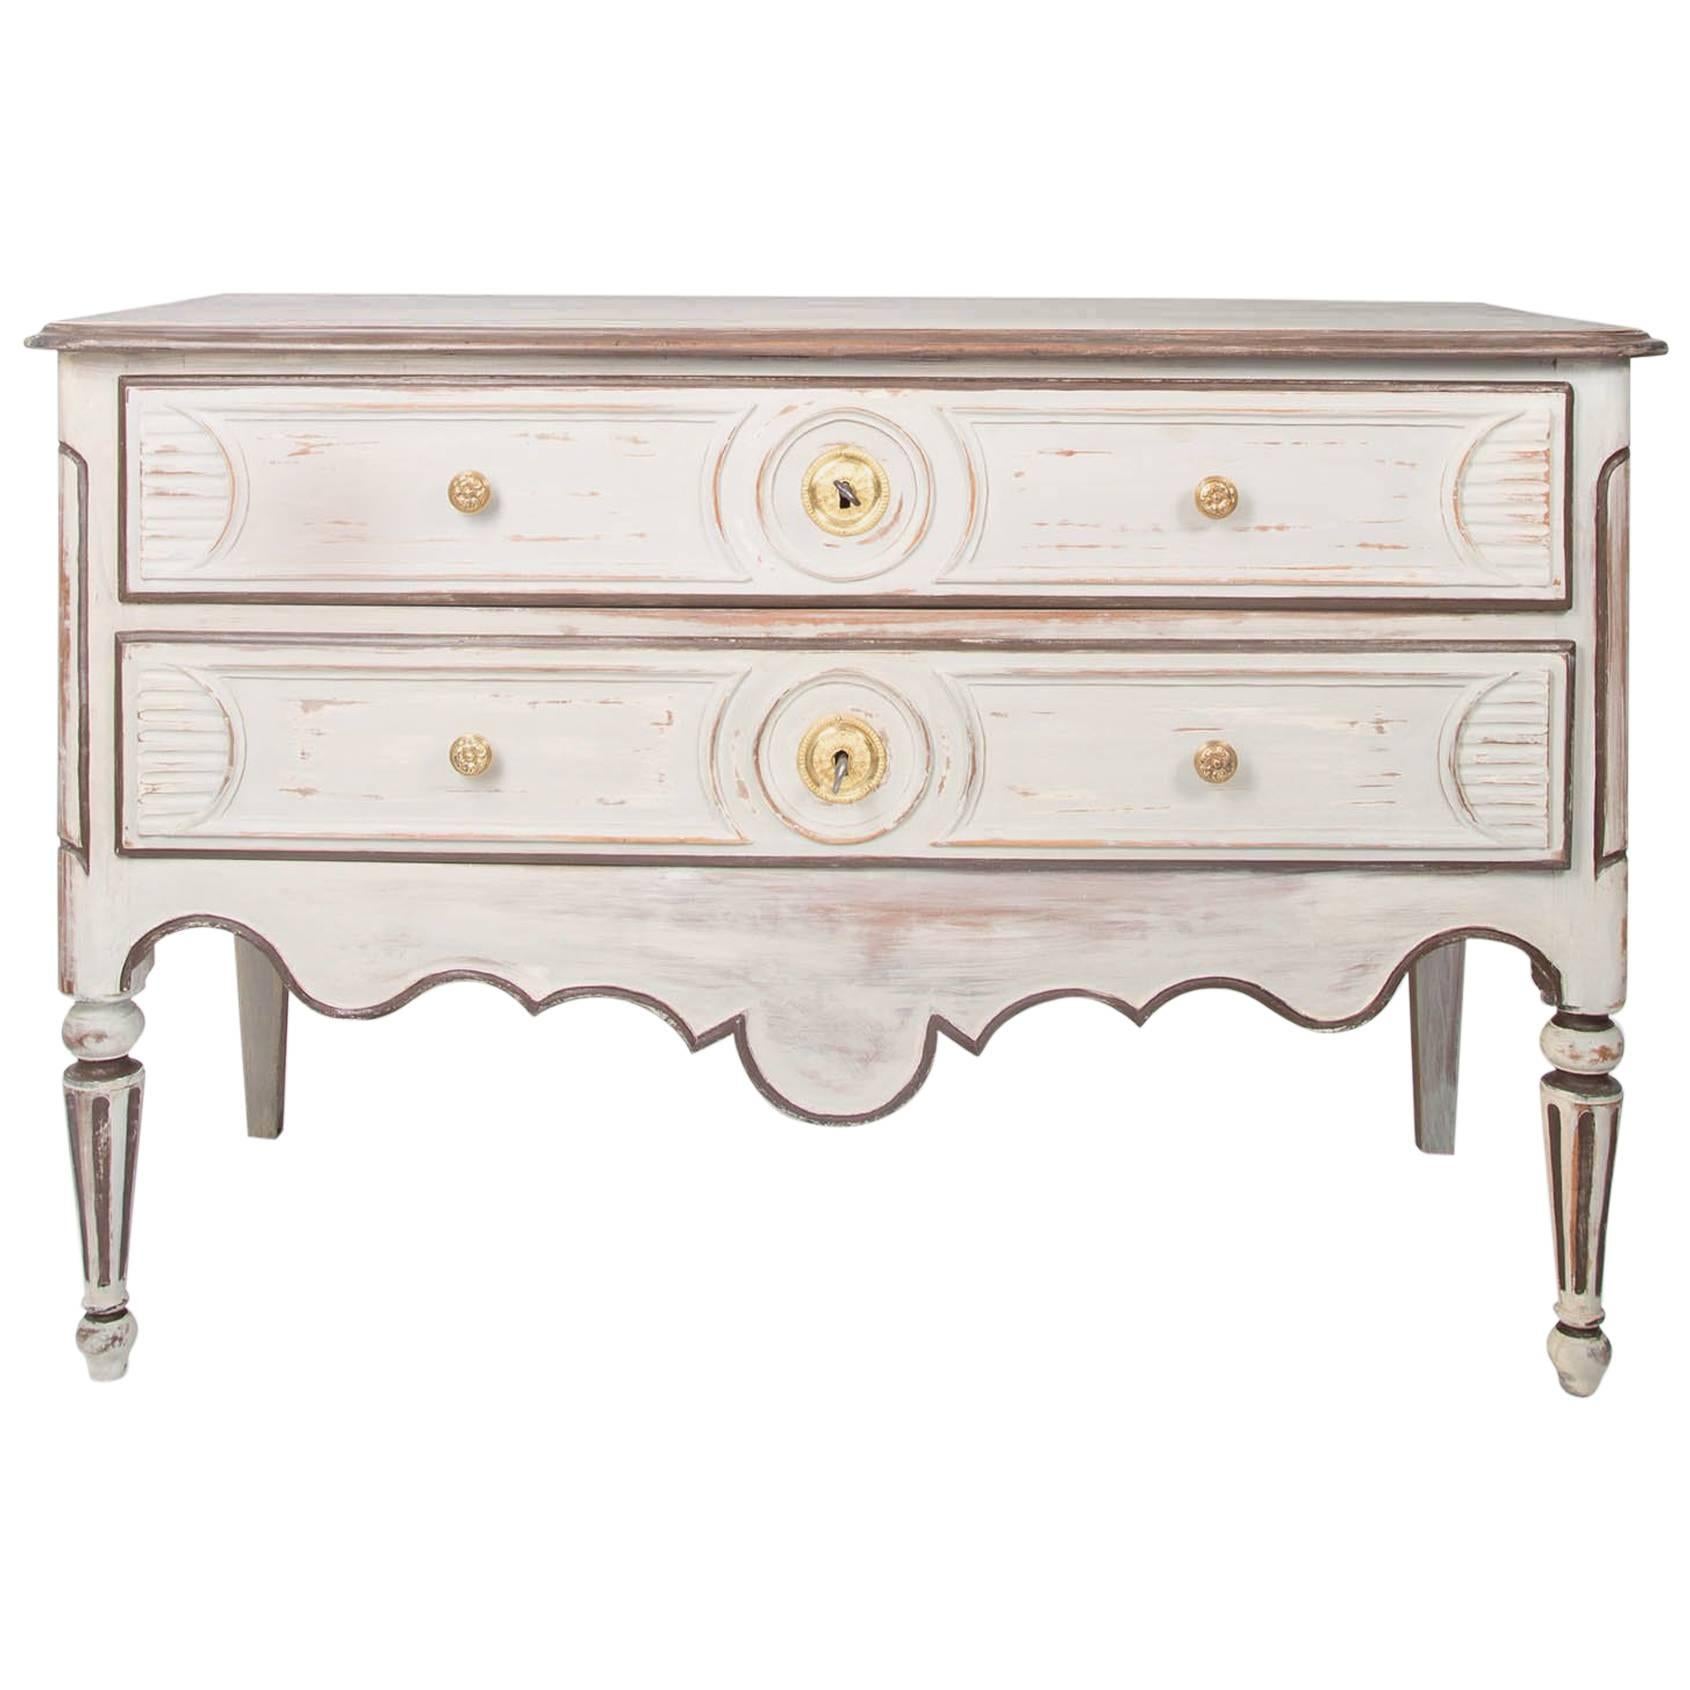 Rustic late 18th Century French Three-Drawer Chest from the Countryside